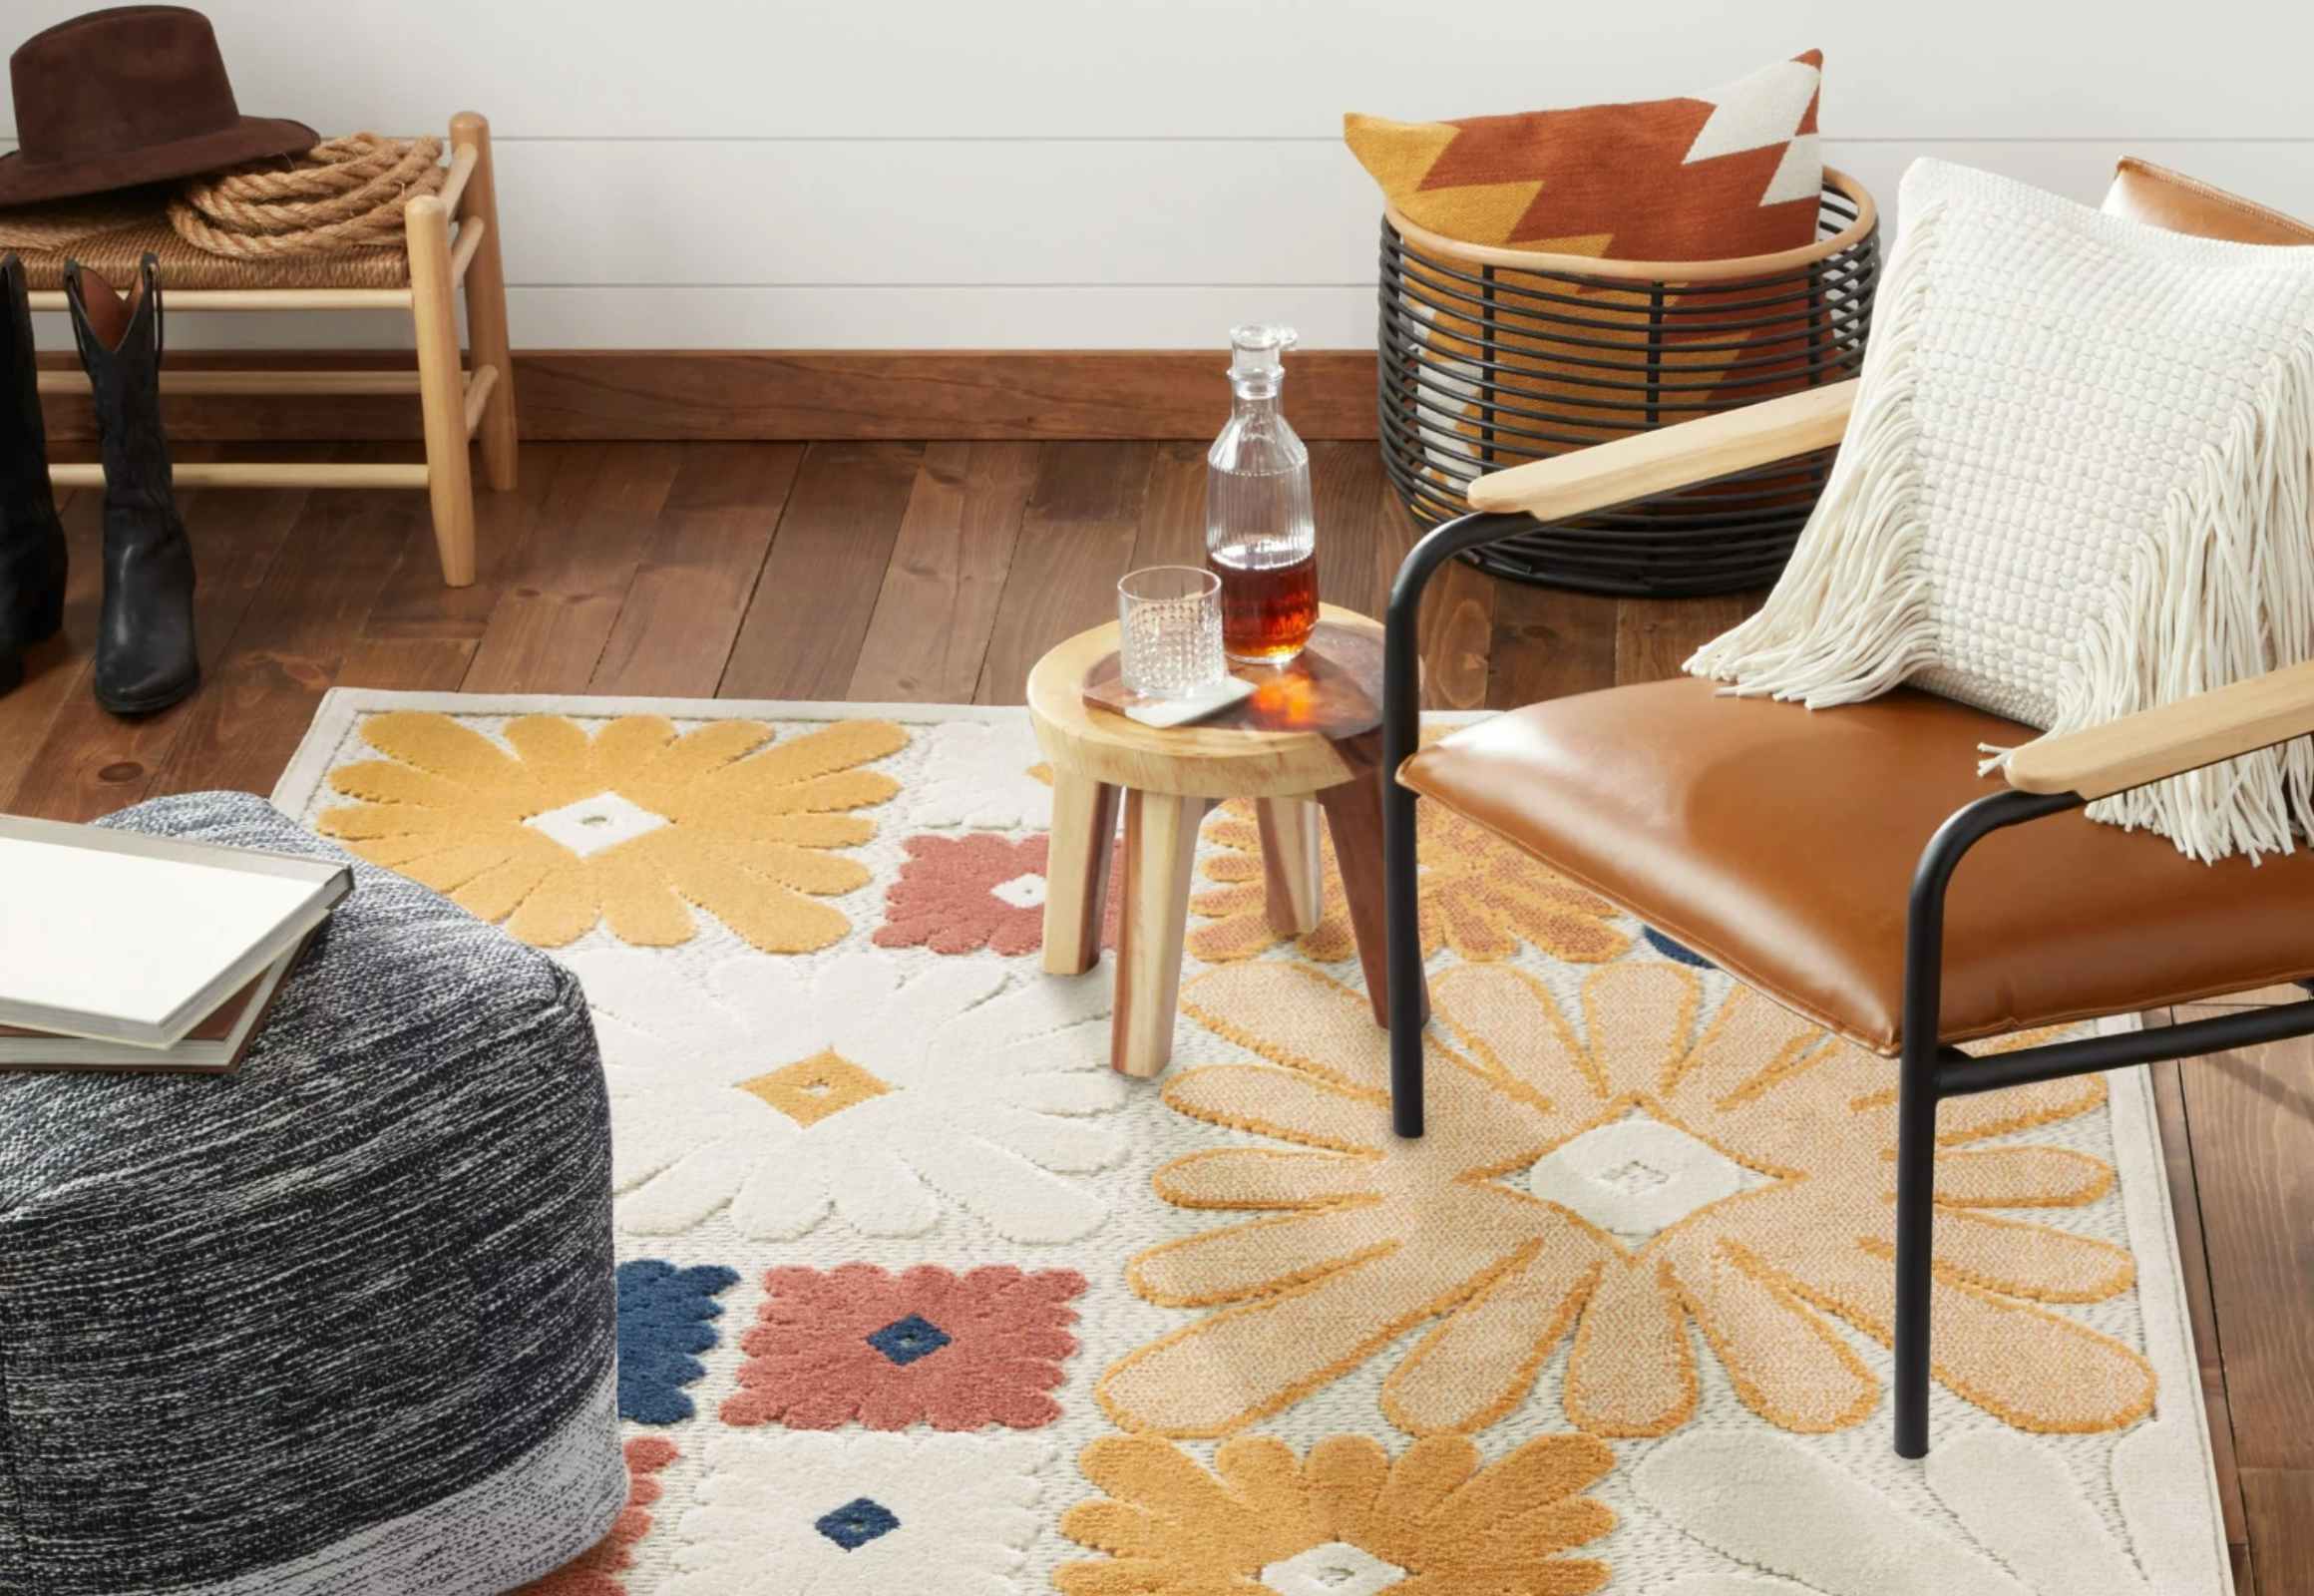 Wanda June Area Rugs Are Up to 75% Off at Walmart — Prices Start at $19